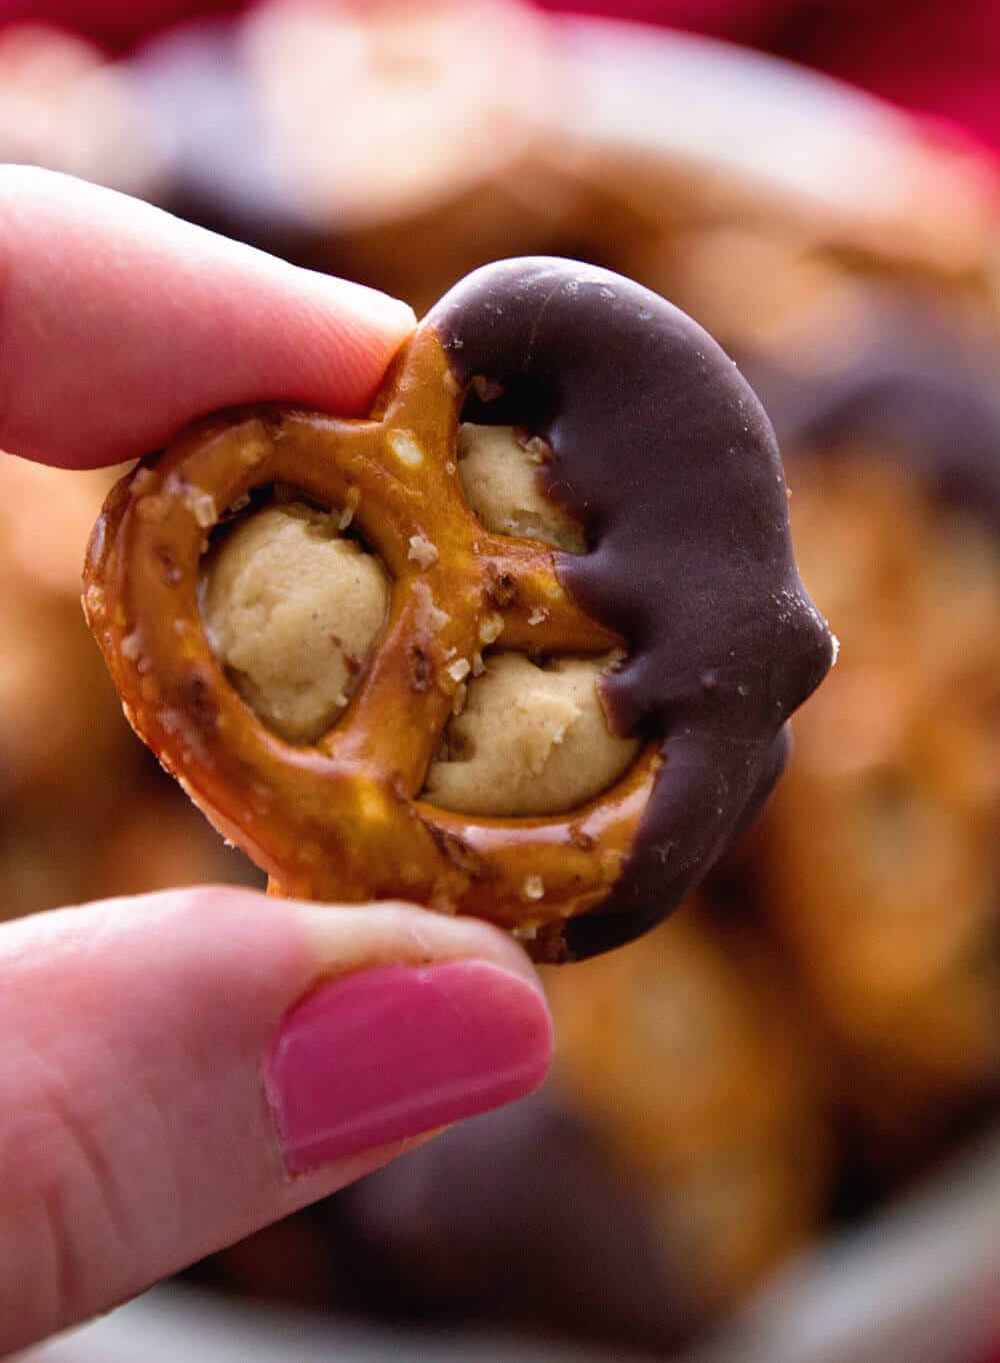 HOW TO MAKE CHOCOLATE DIPPED PEANUT BUTTER PRETZELS